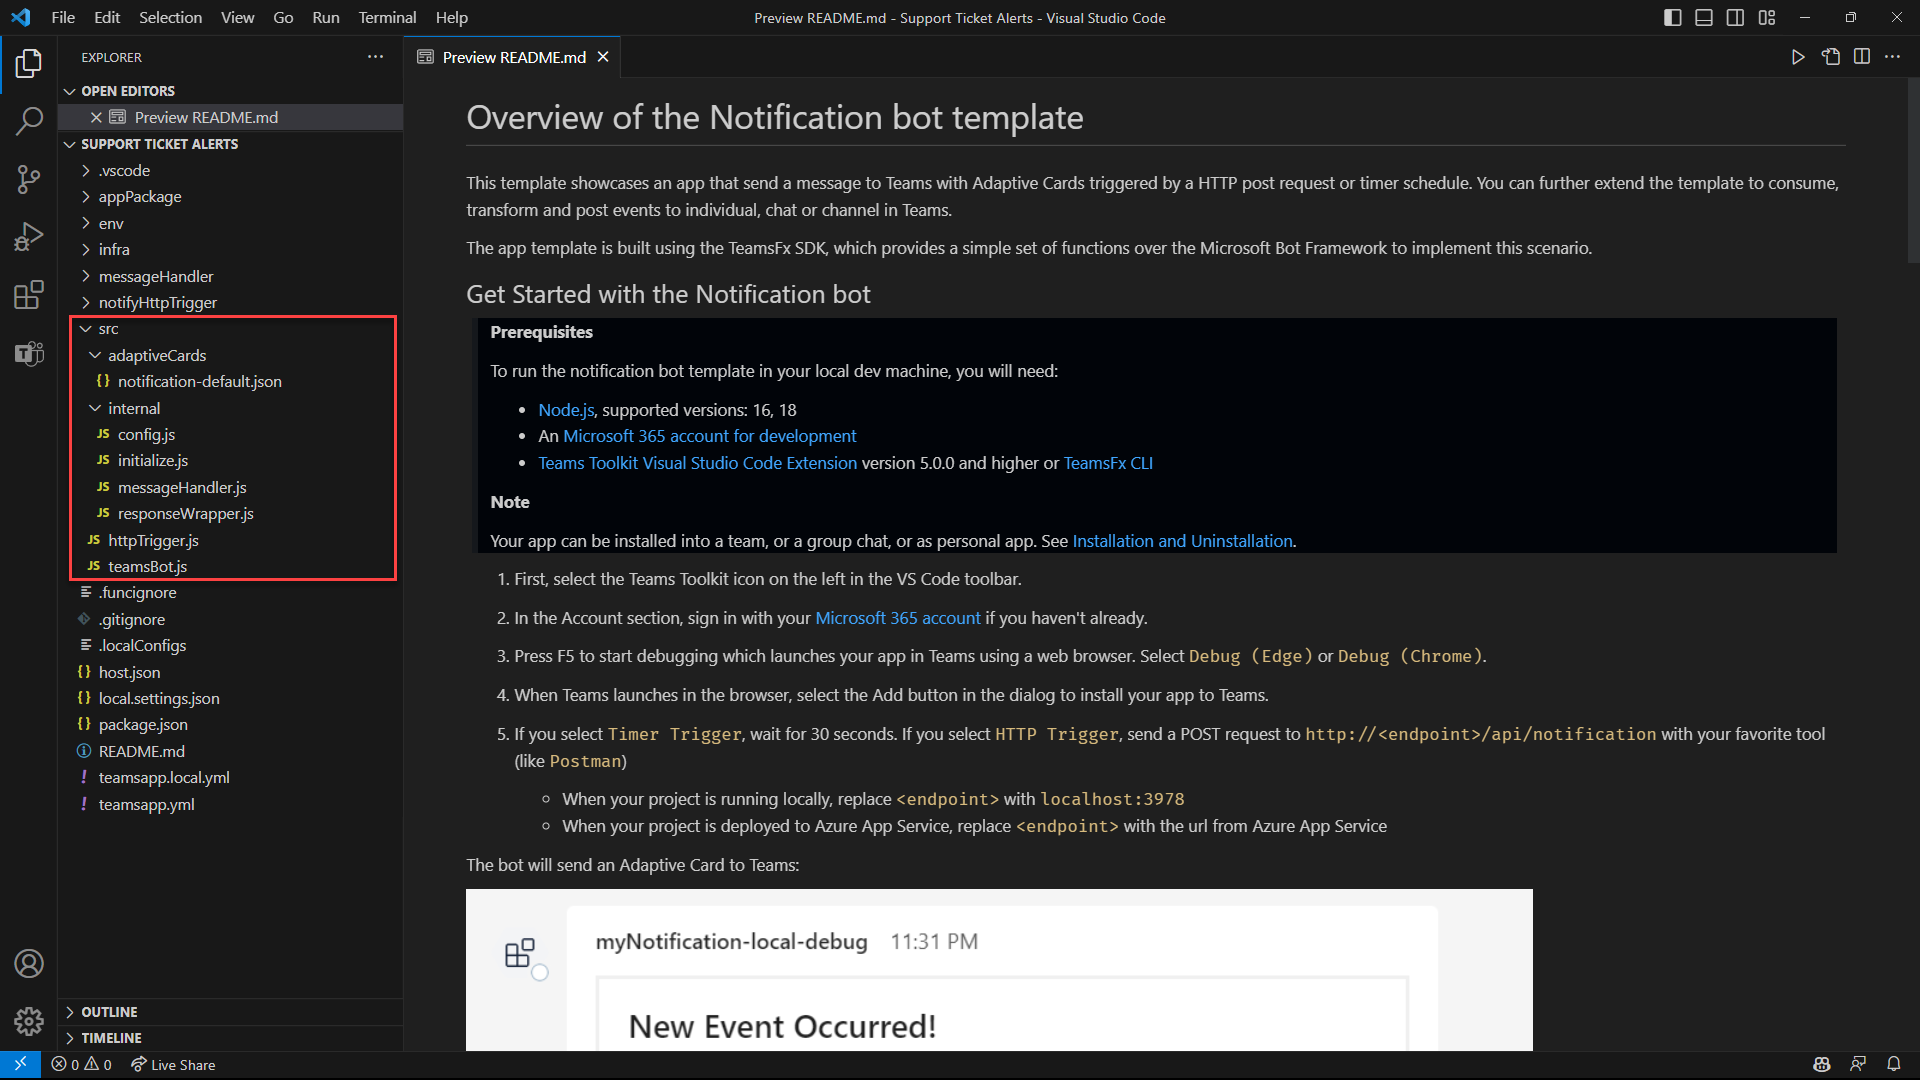 Screenshot of Visual Studio Code that shows the readme file for the notification bot template and code files on the Explorer pane.